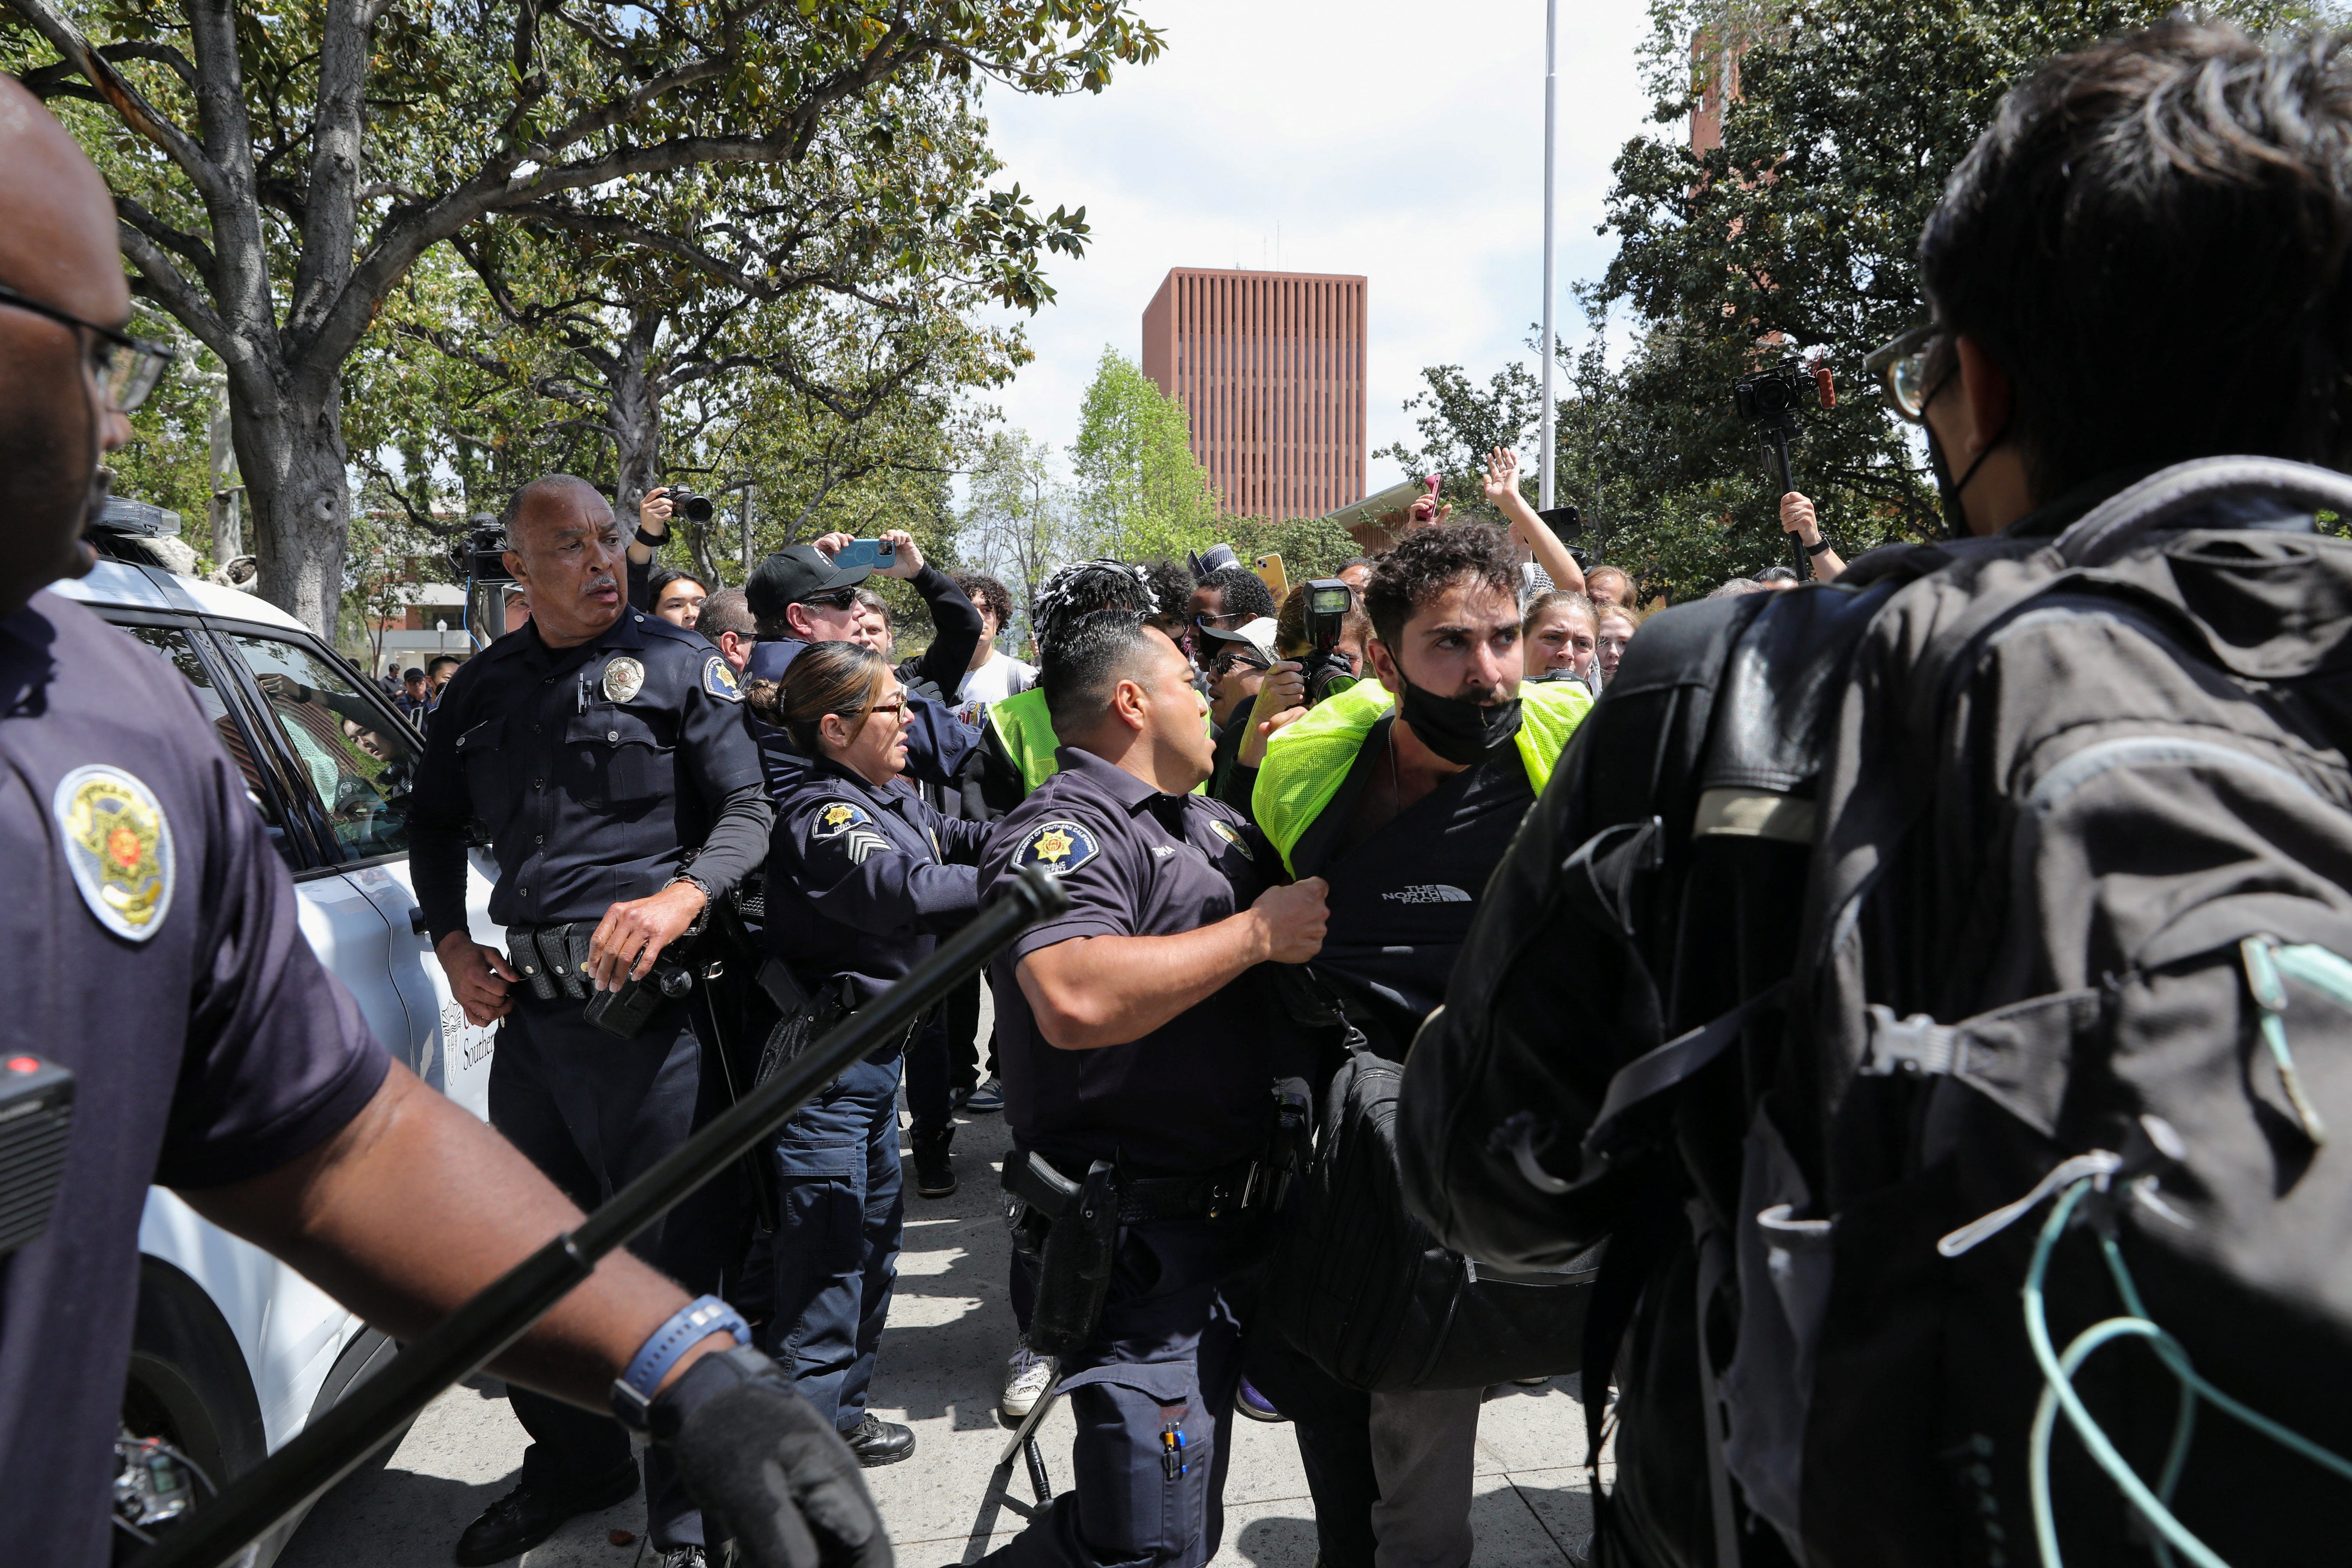 USC Safety officers try to disperse students who protest in support of Palestinians, at the University of Southern California's Alumni Park, during demonstraions on 24 April